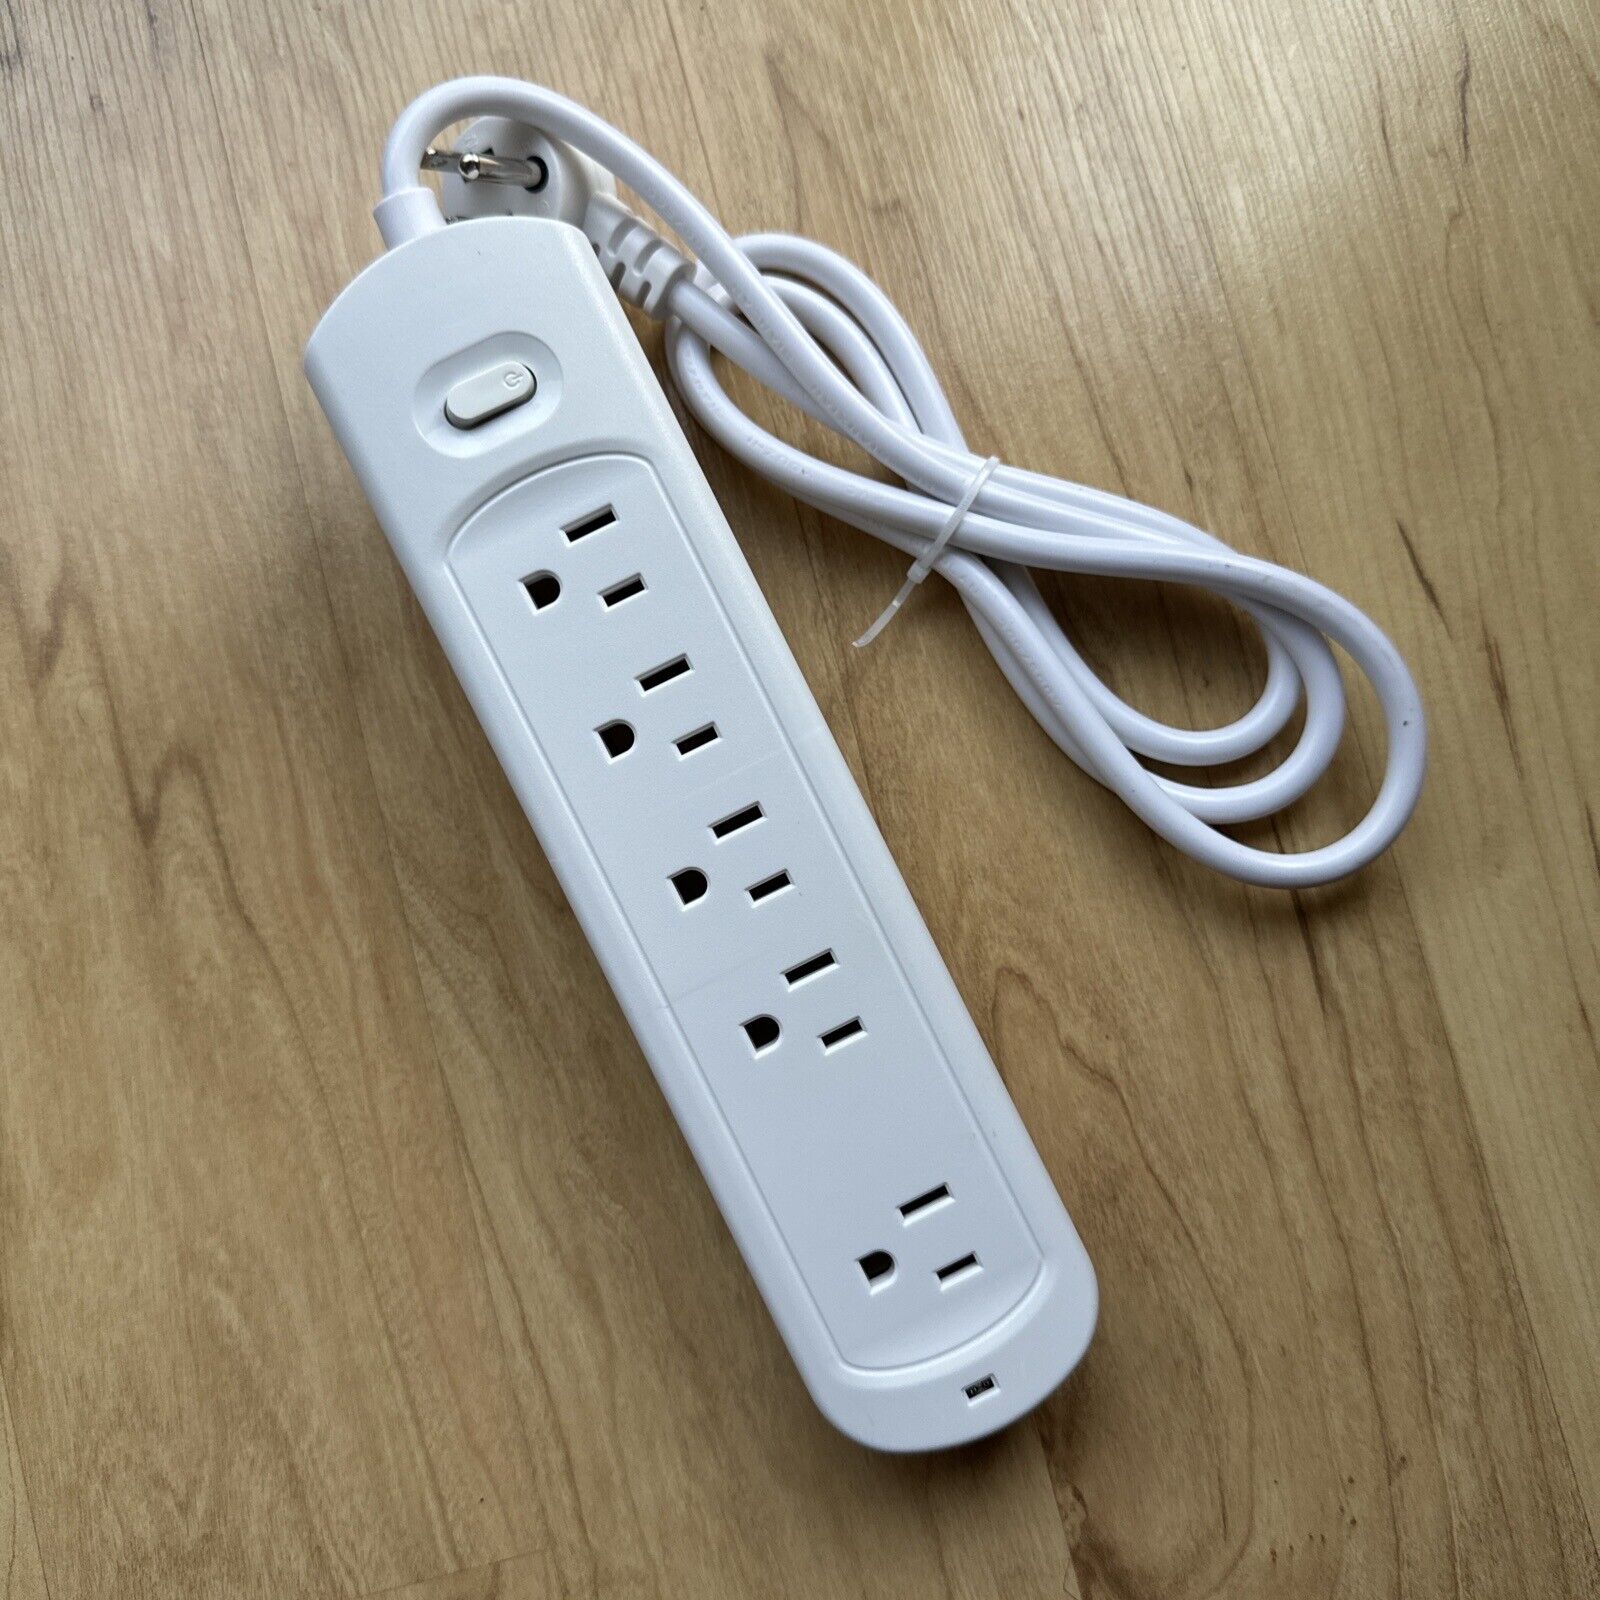 5 AC POWER OUTLET EXTENDER SURGE OVERLOAD PROTECTOR WHITE FLAT PLUG WITH SWITCH